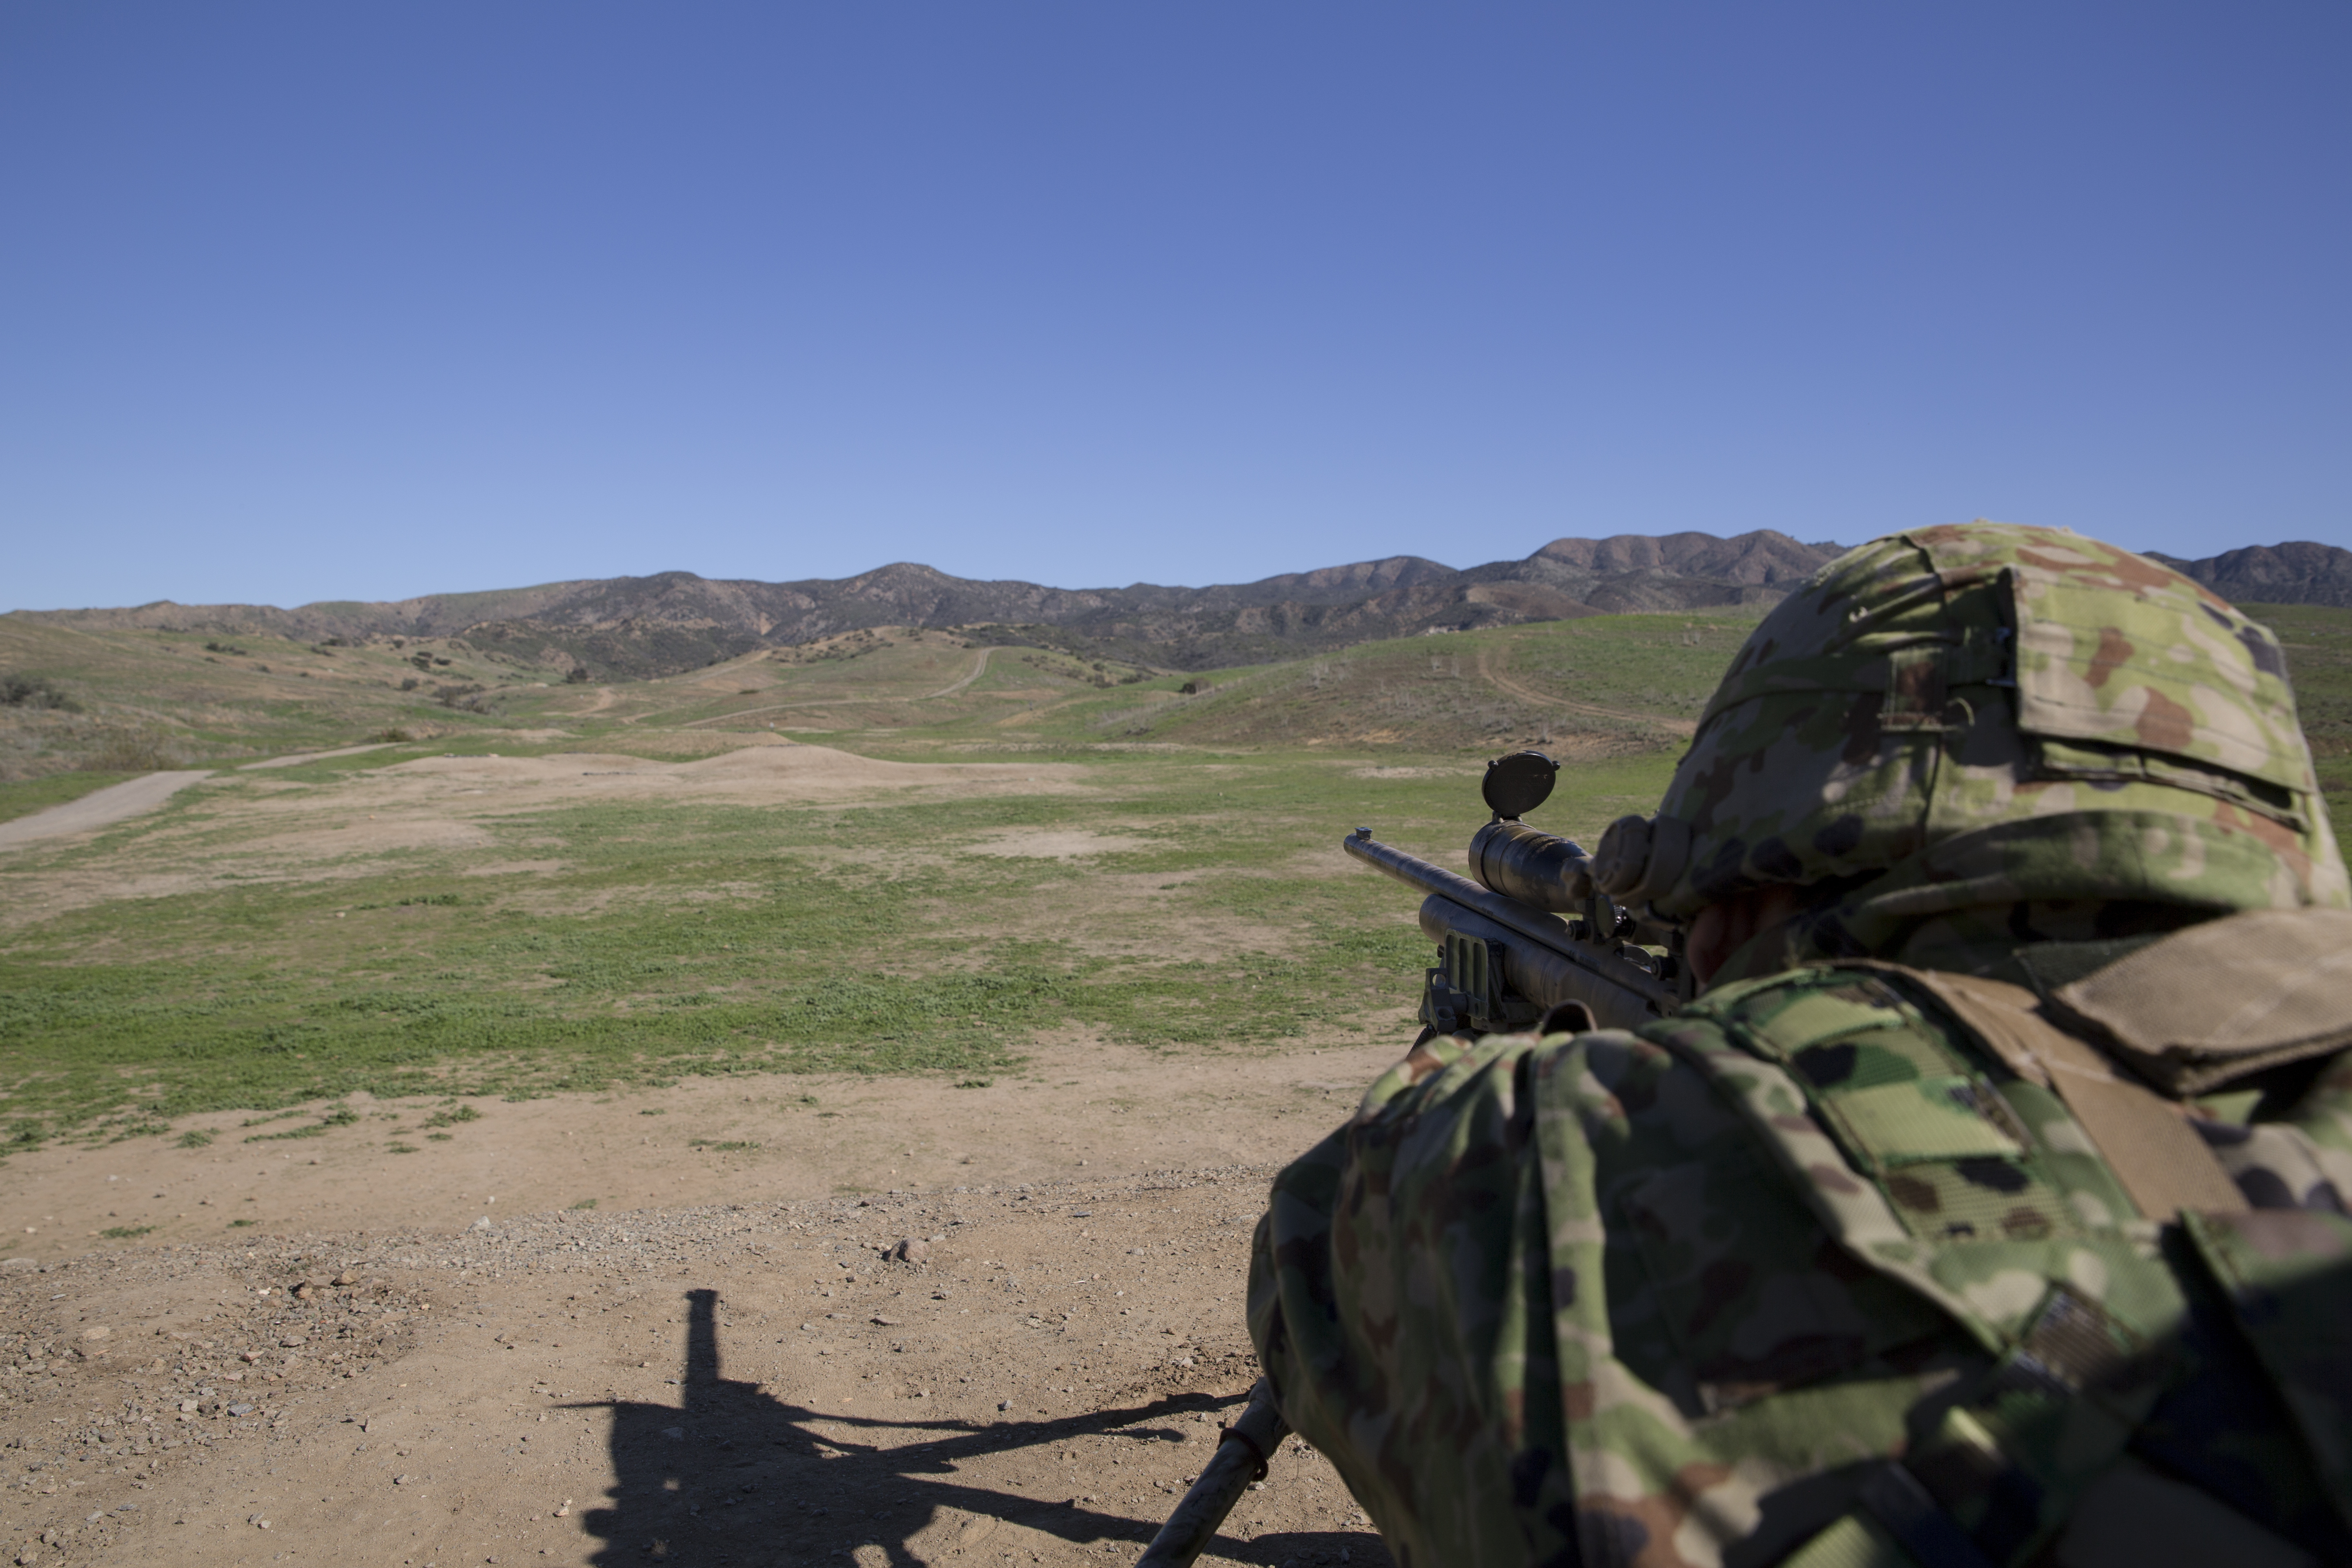 A Japan Ground Self-Defense Force soldier fires at a target while his spotter observes the impact, during an unknown distance course of fire, aboard Marine Corps Base Camp Pendleton, Calif., Jan 28, 2016. US Marine Corps Photo